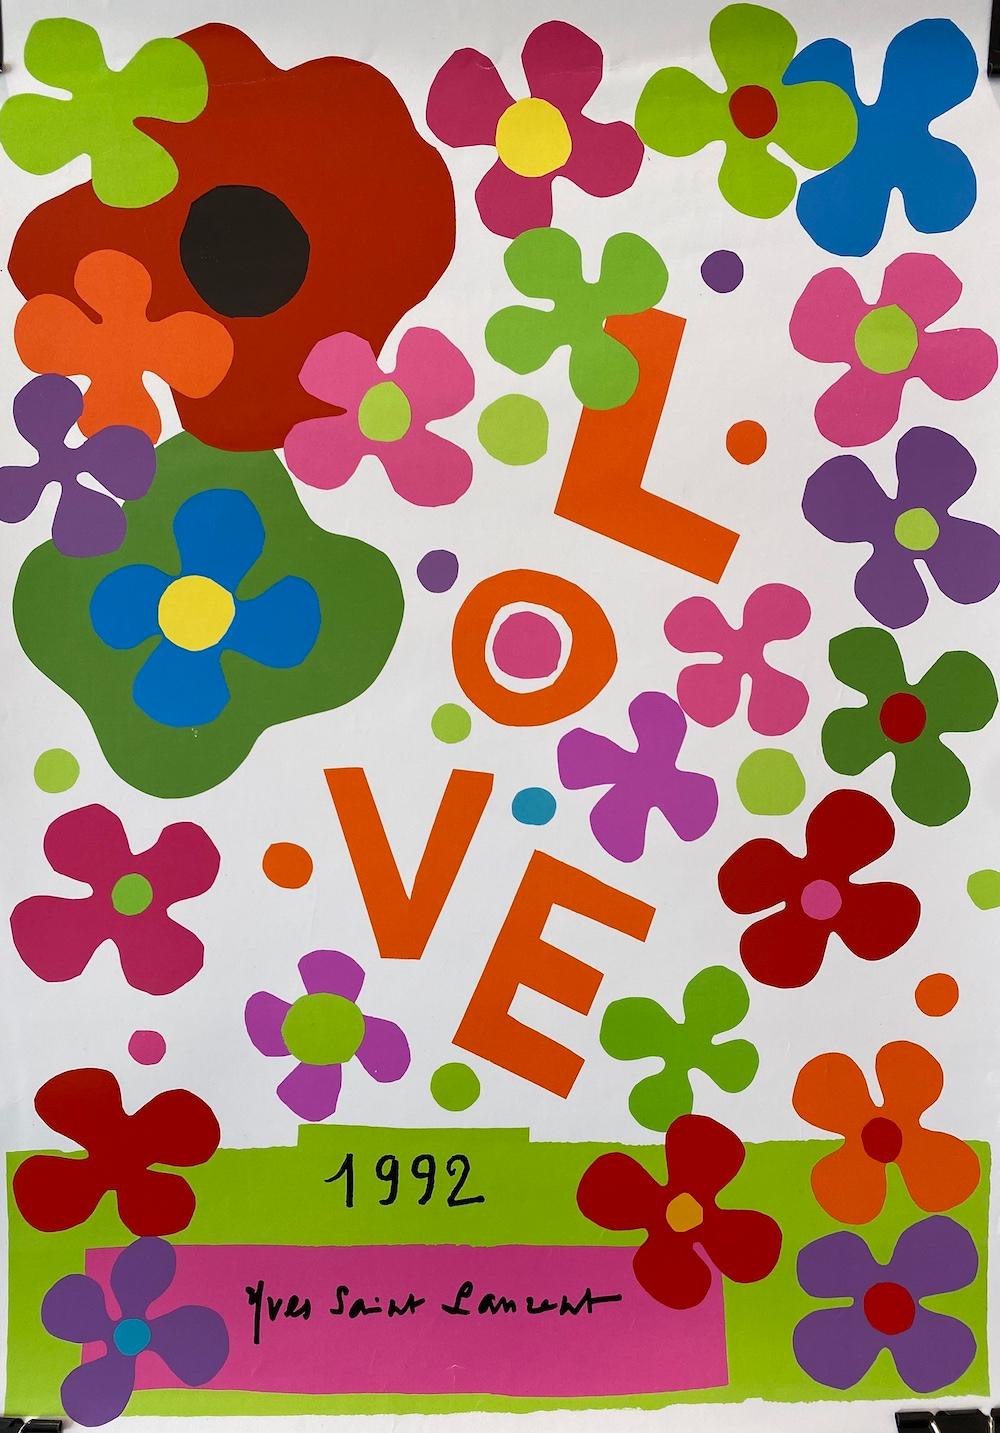 Yves Saint Laurent 'LOVE 1998' Original Vintage Poster  

In 1970, Yves Saint Laurent designed the first in a series of greeting cards in poster form that he would send his friends, collaborators, and clients annually until 2007. Every year, Saint